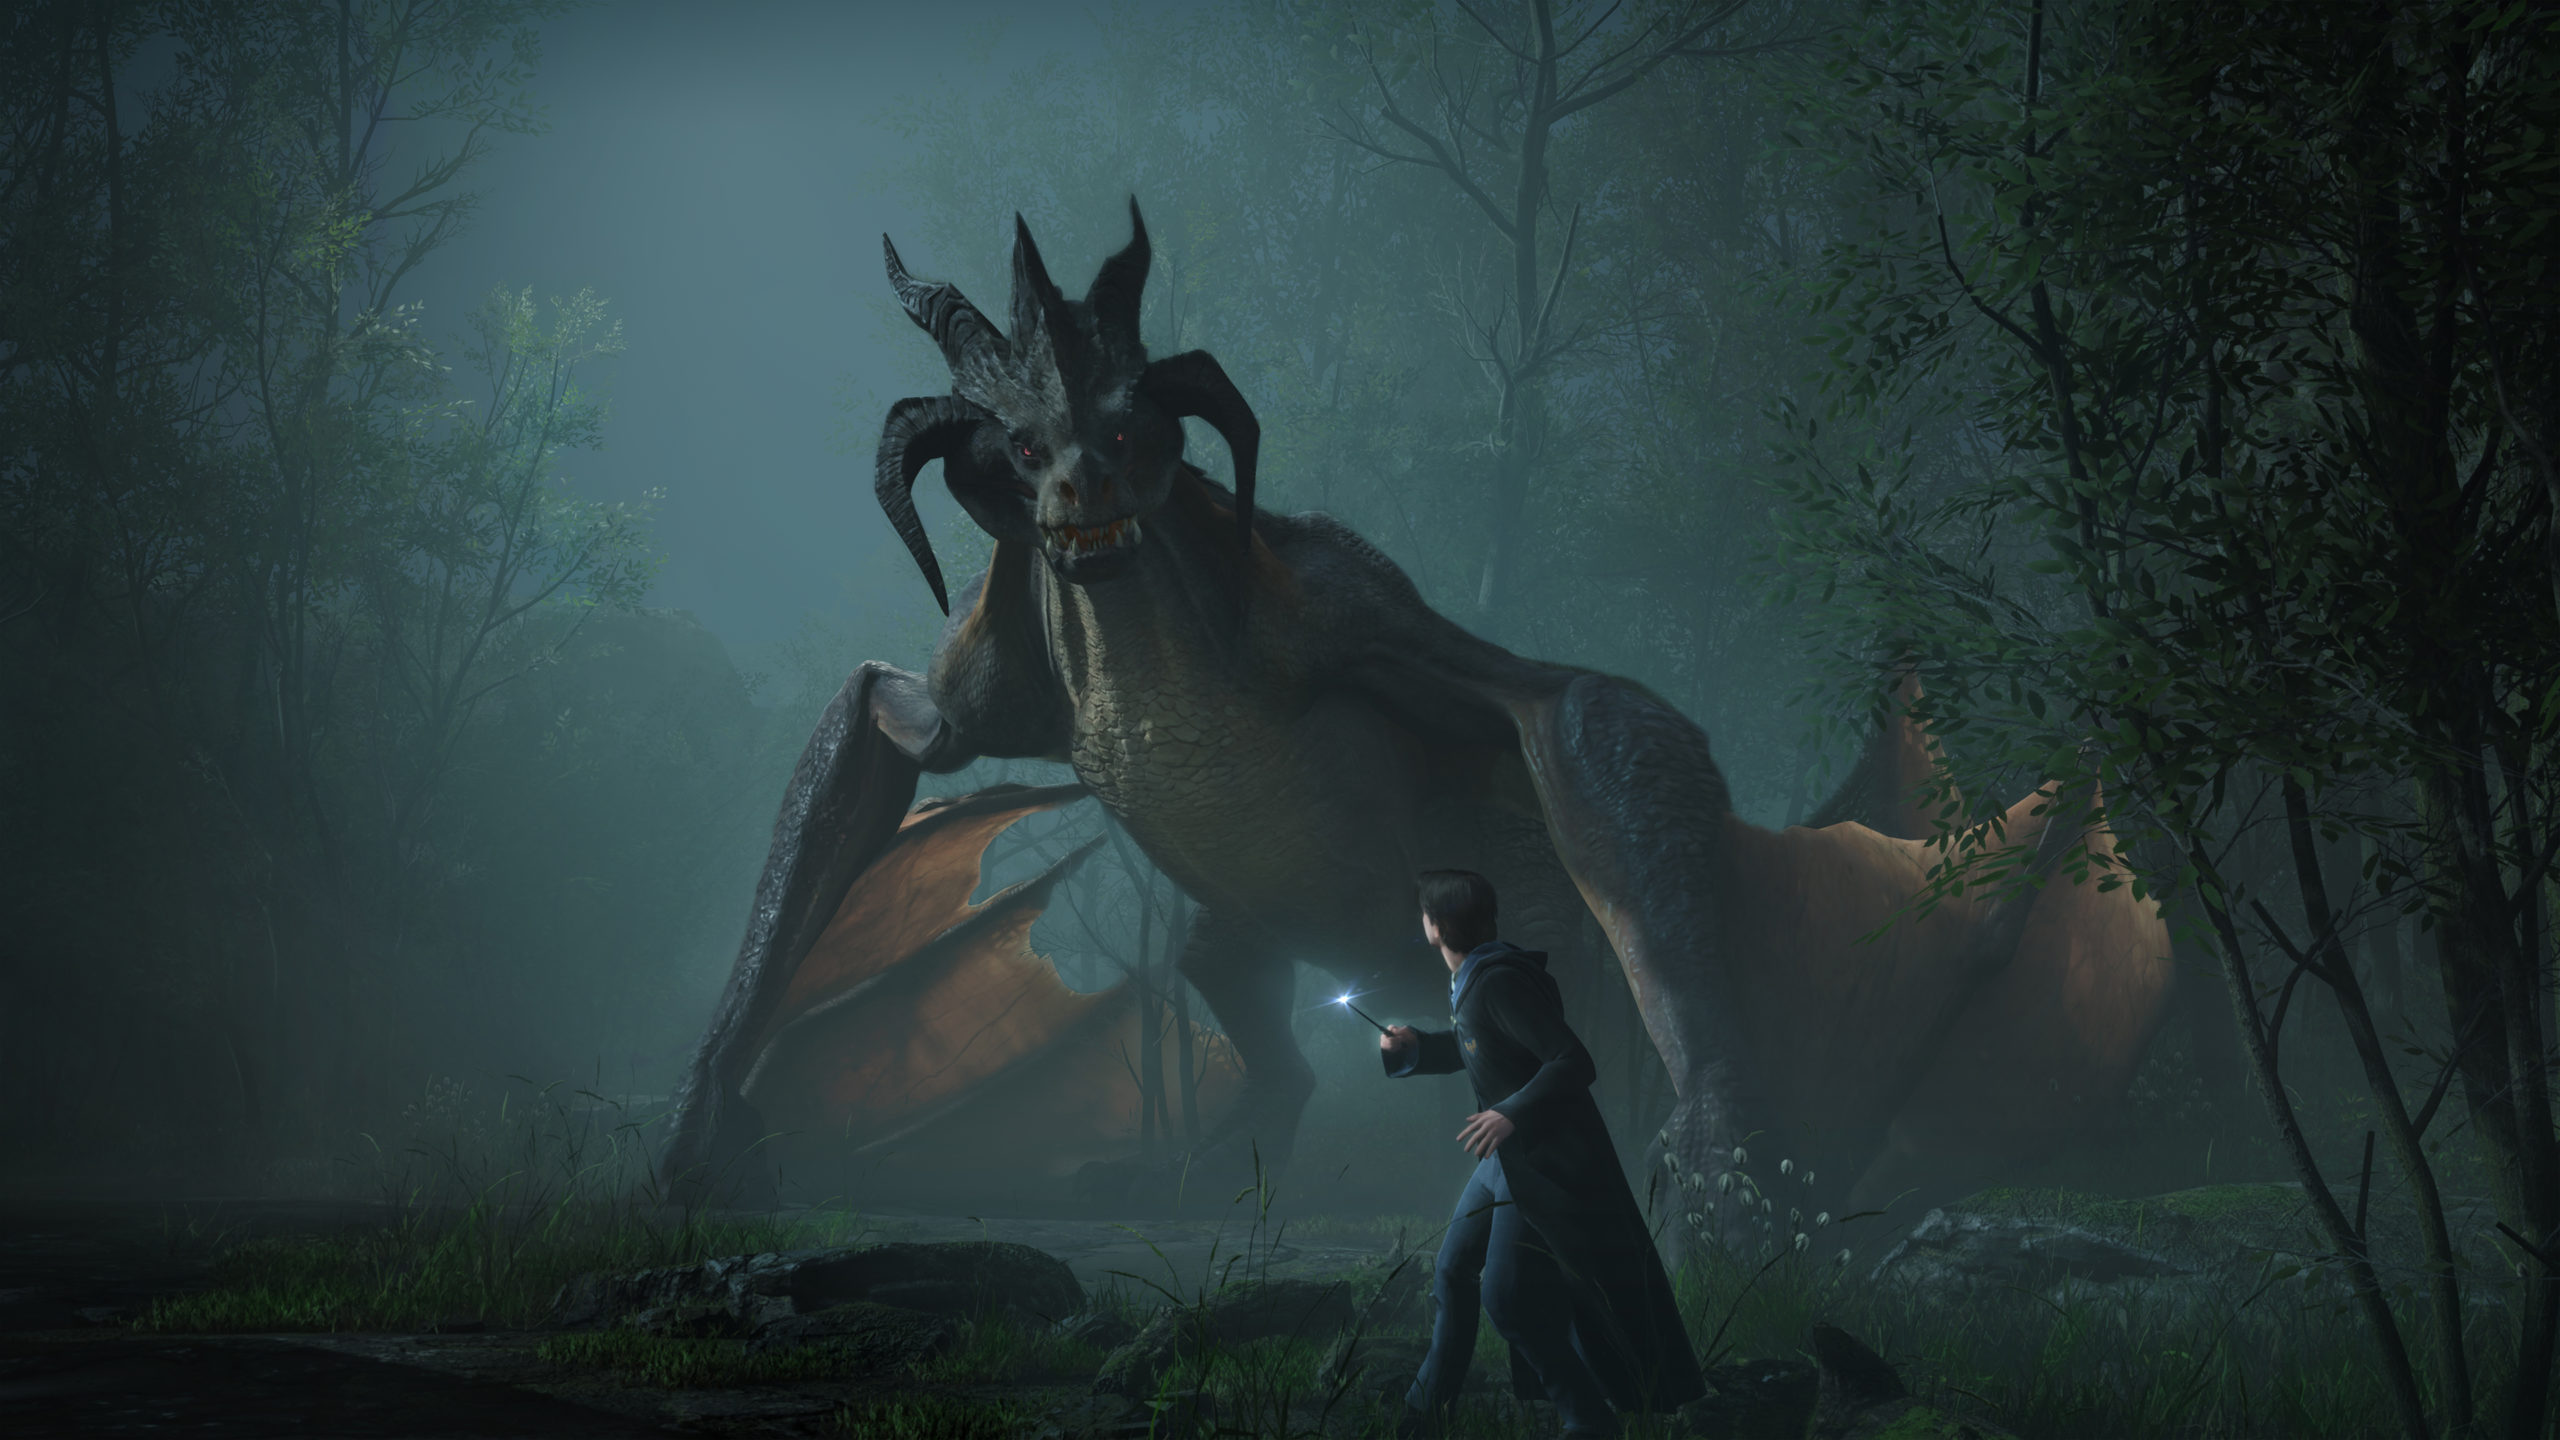 A screenshot from “Hogwarts Legacy” shows a character taking on a dragon.